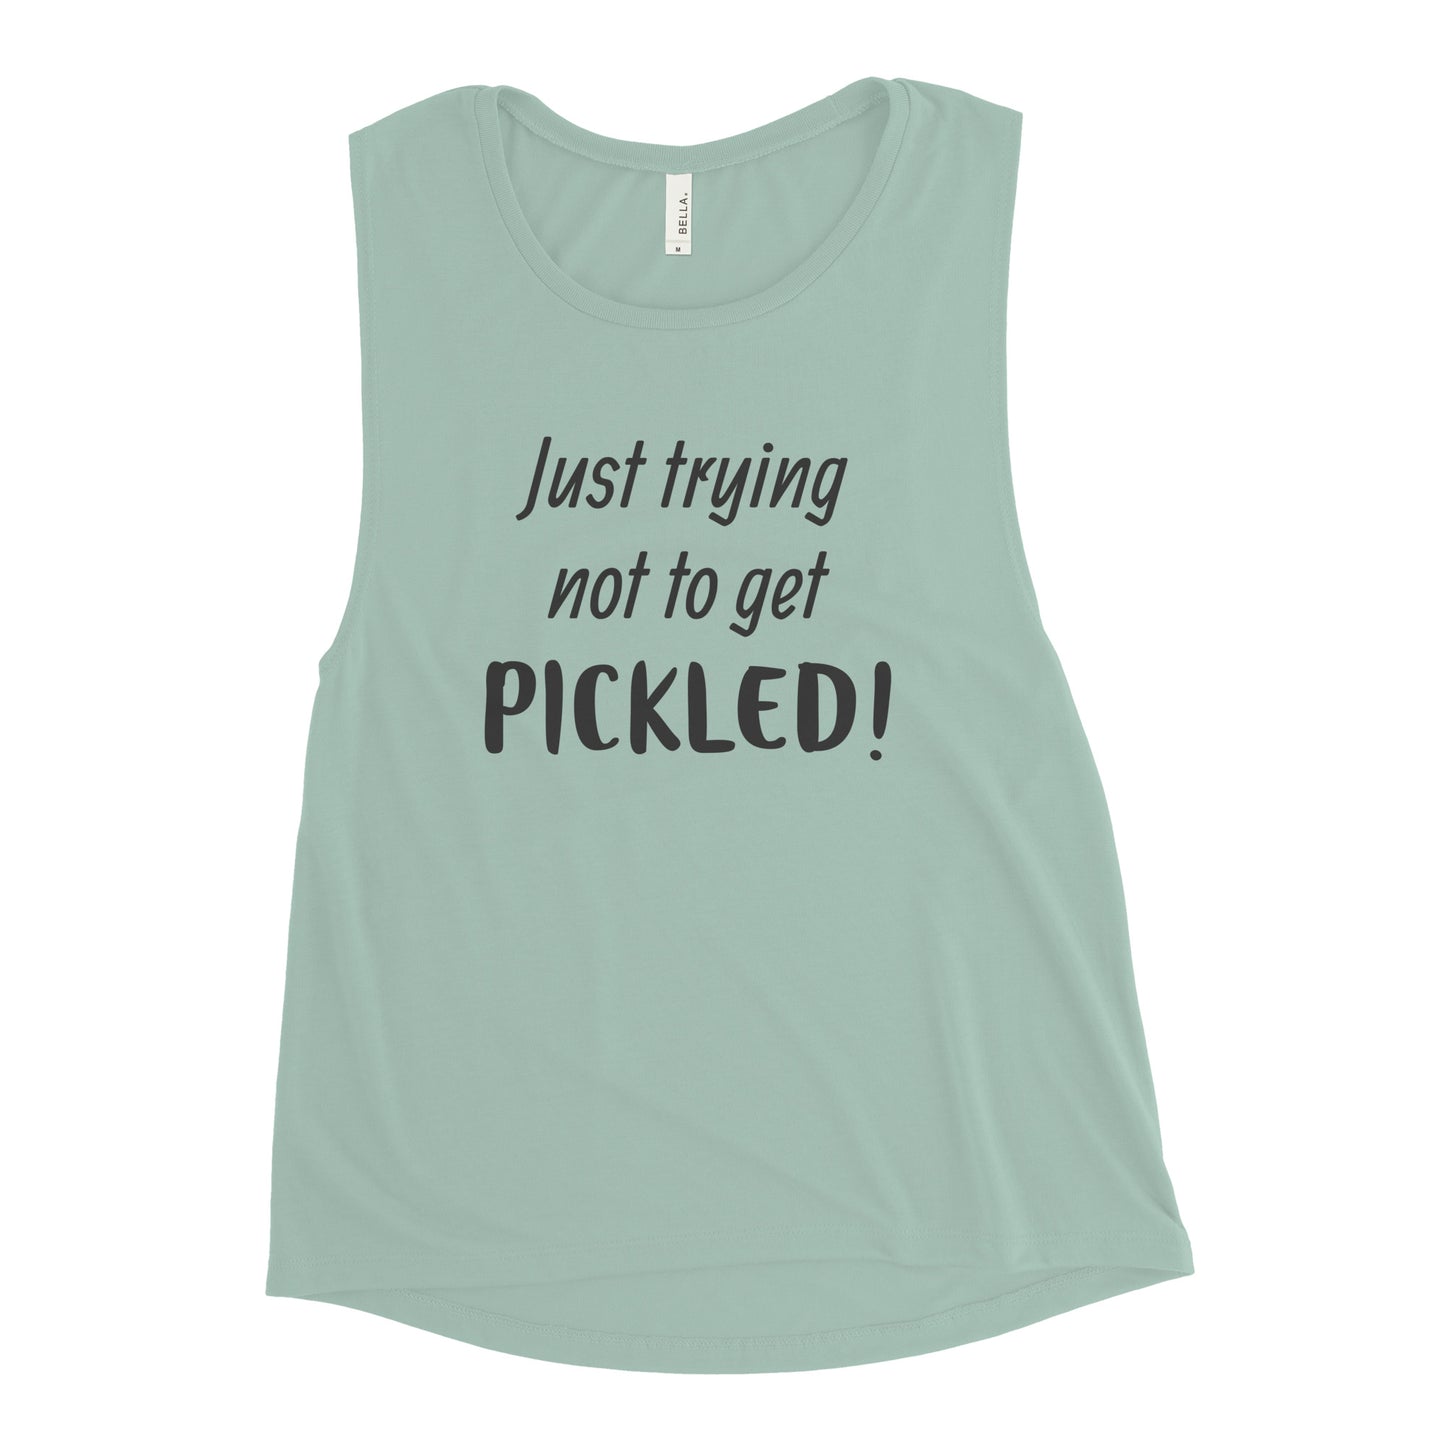 Trying not to get pickled - Ladies’ Muscle Tank